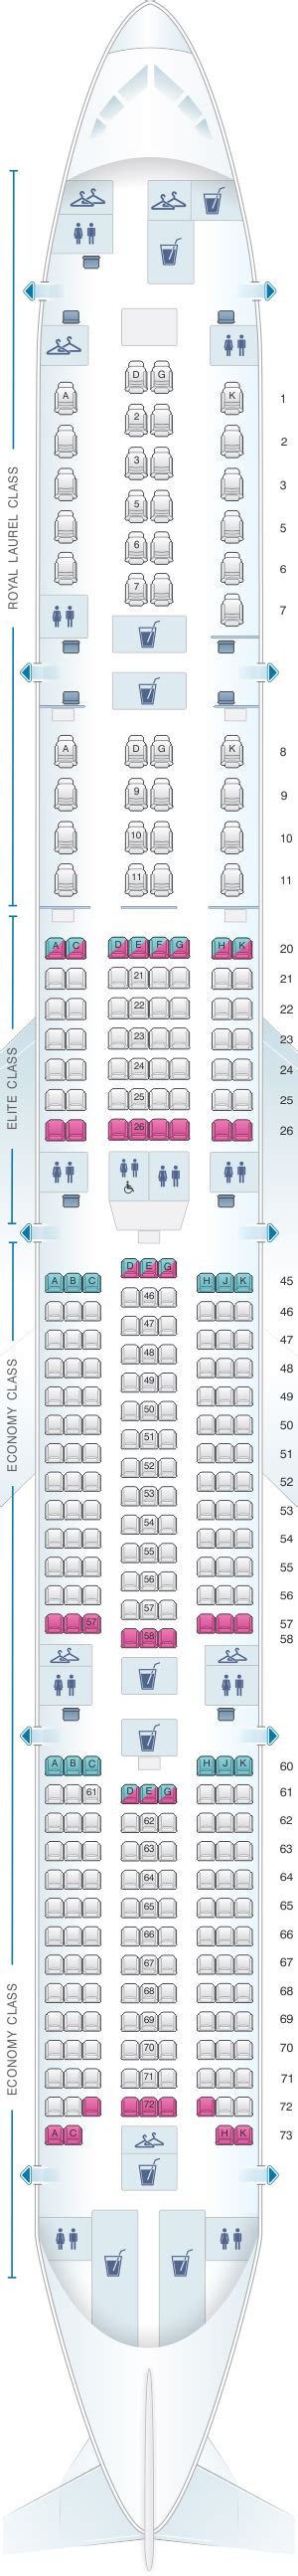 For your next Delta flight, use this seating chart to get the most comfortable seats, legroom, and recline on . Seat Maps; Airlines; Cheap Flights; Comparison Charts. Short-haul ... Airlines > Delta > Planes & Seat Maps > Delta Seat Maps. Overview; Planes & Seat Maps. Airbus A220-100 (CS1) Airbus A319 (319) Airbus A320 (32K) Layout 1;. 